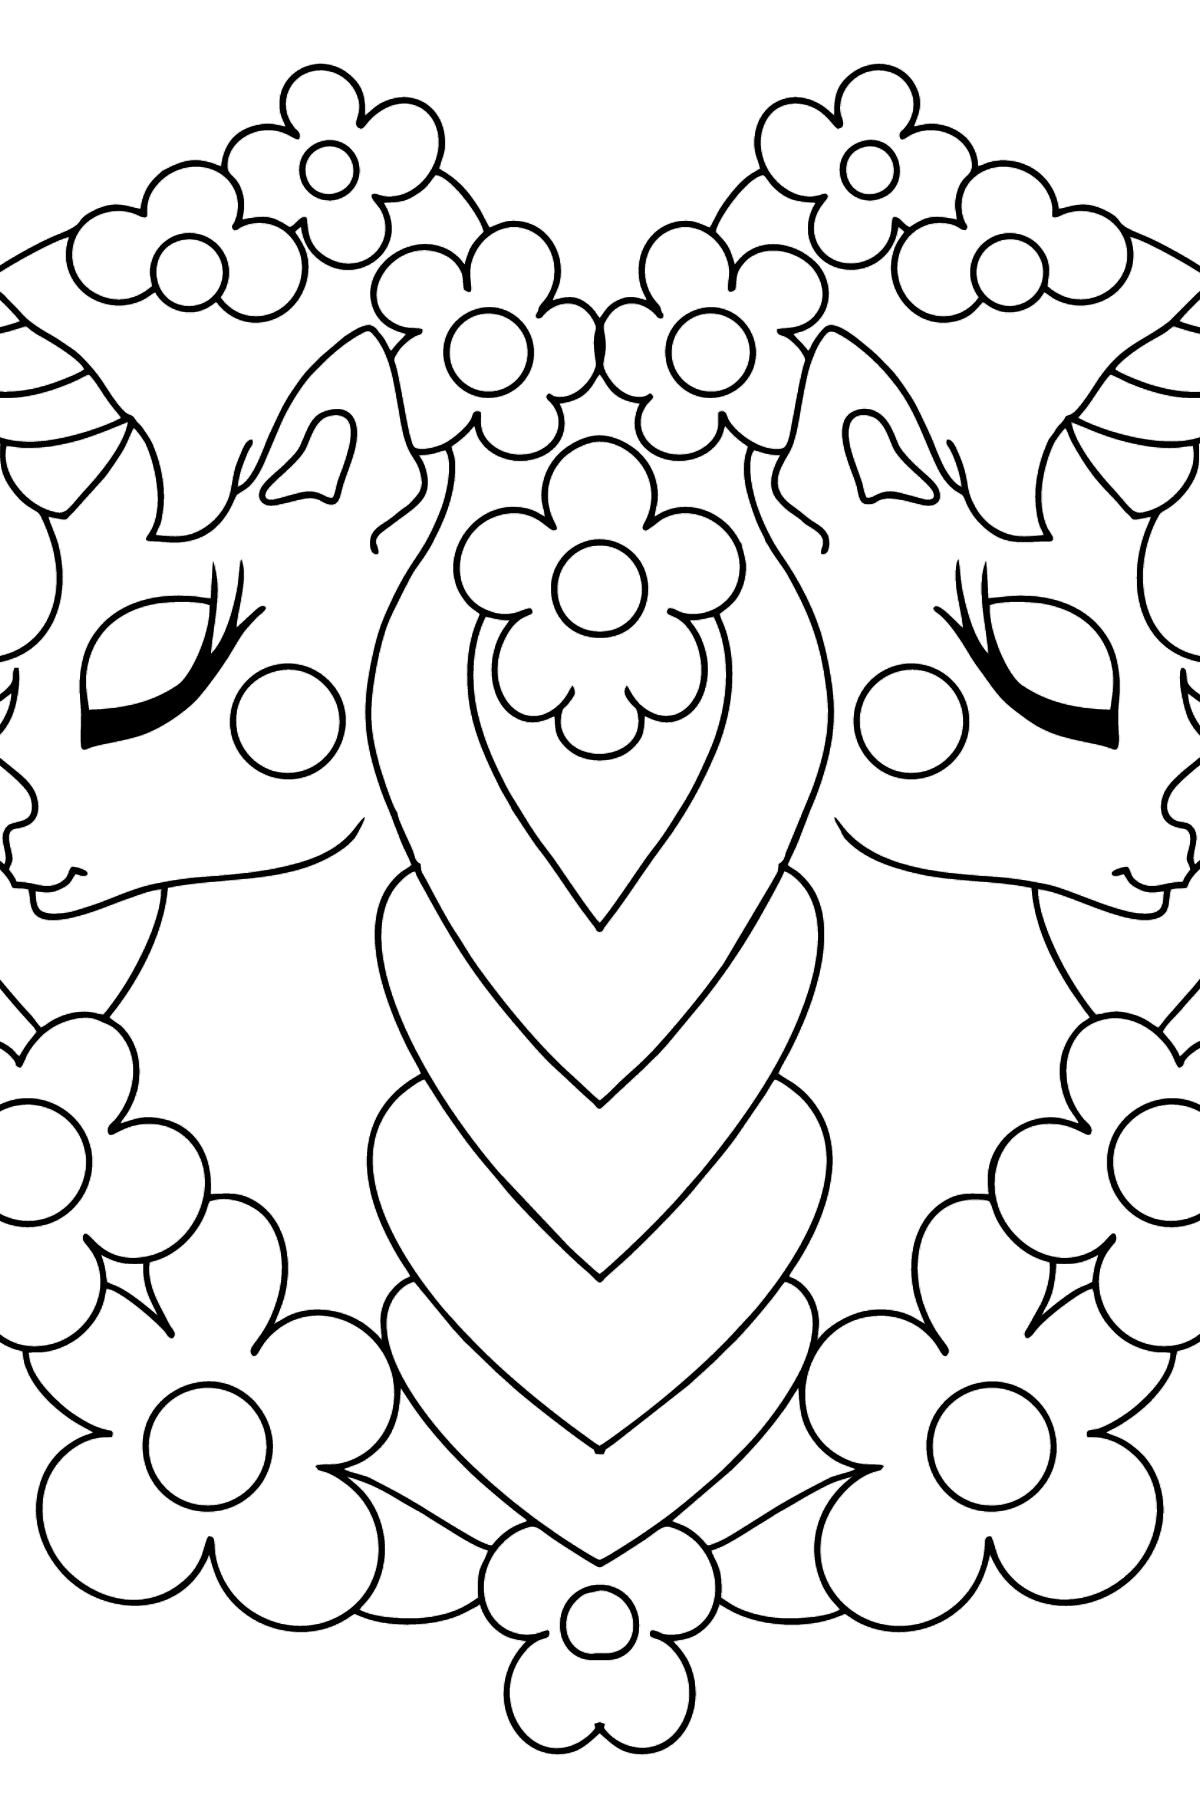 Simple Coloring Book Adorable Unicorn - Coloring Pages for Kids